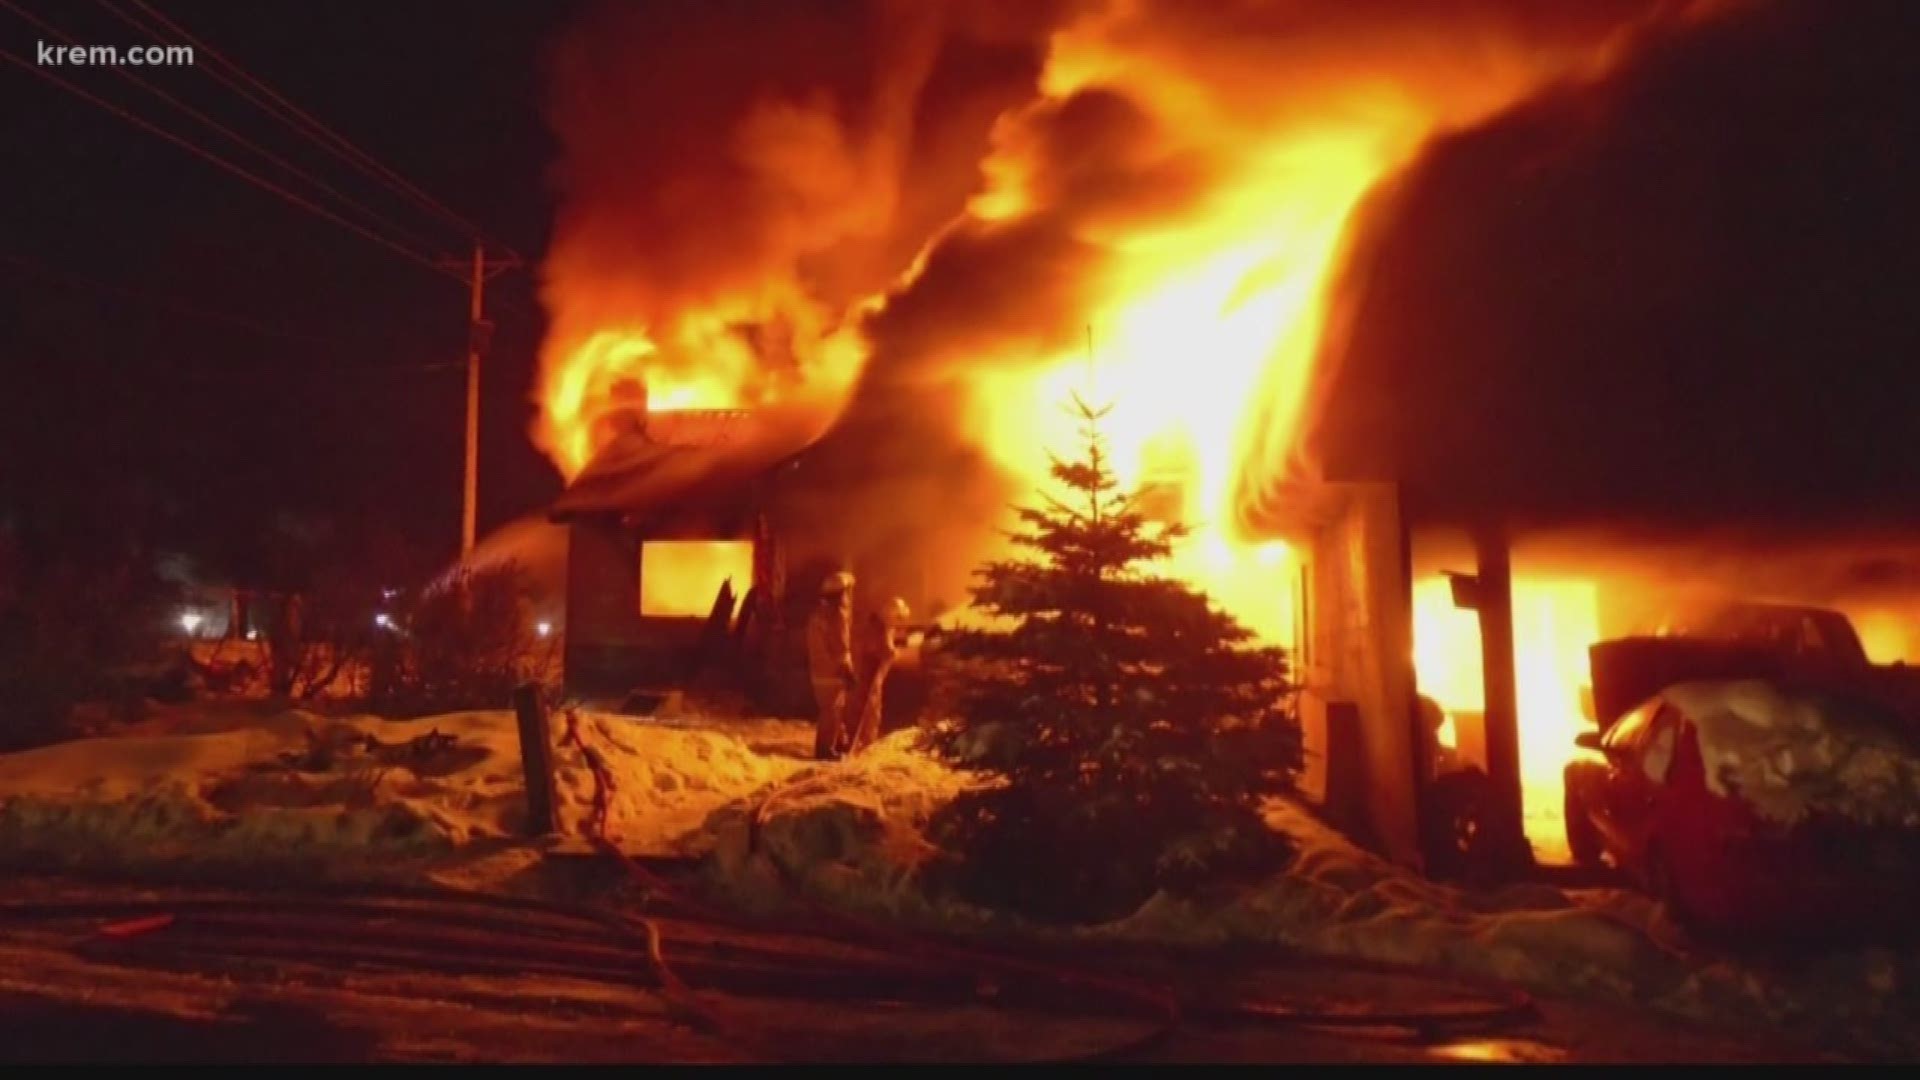 According to a release from the Clearwater County Sheriff's Office, 3-year-old twin boys were unable to make it out of an early morning house fire.